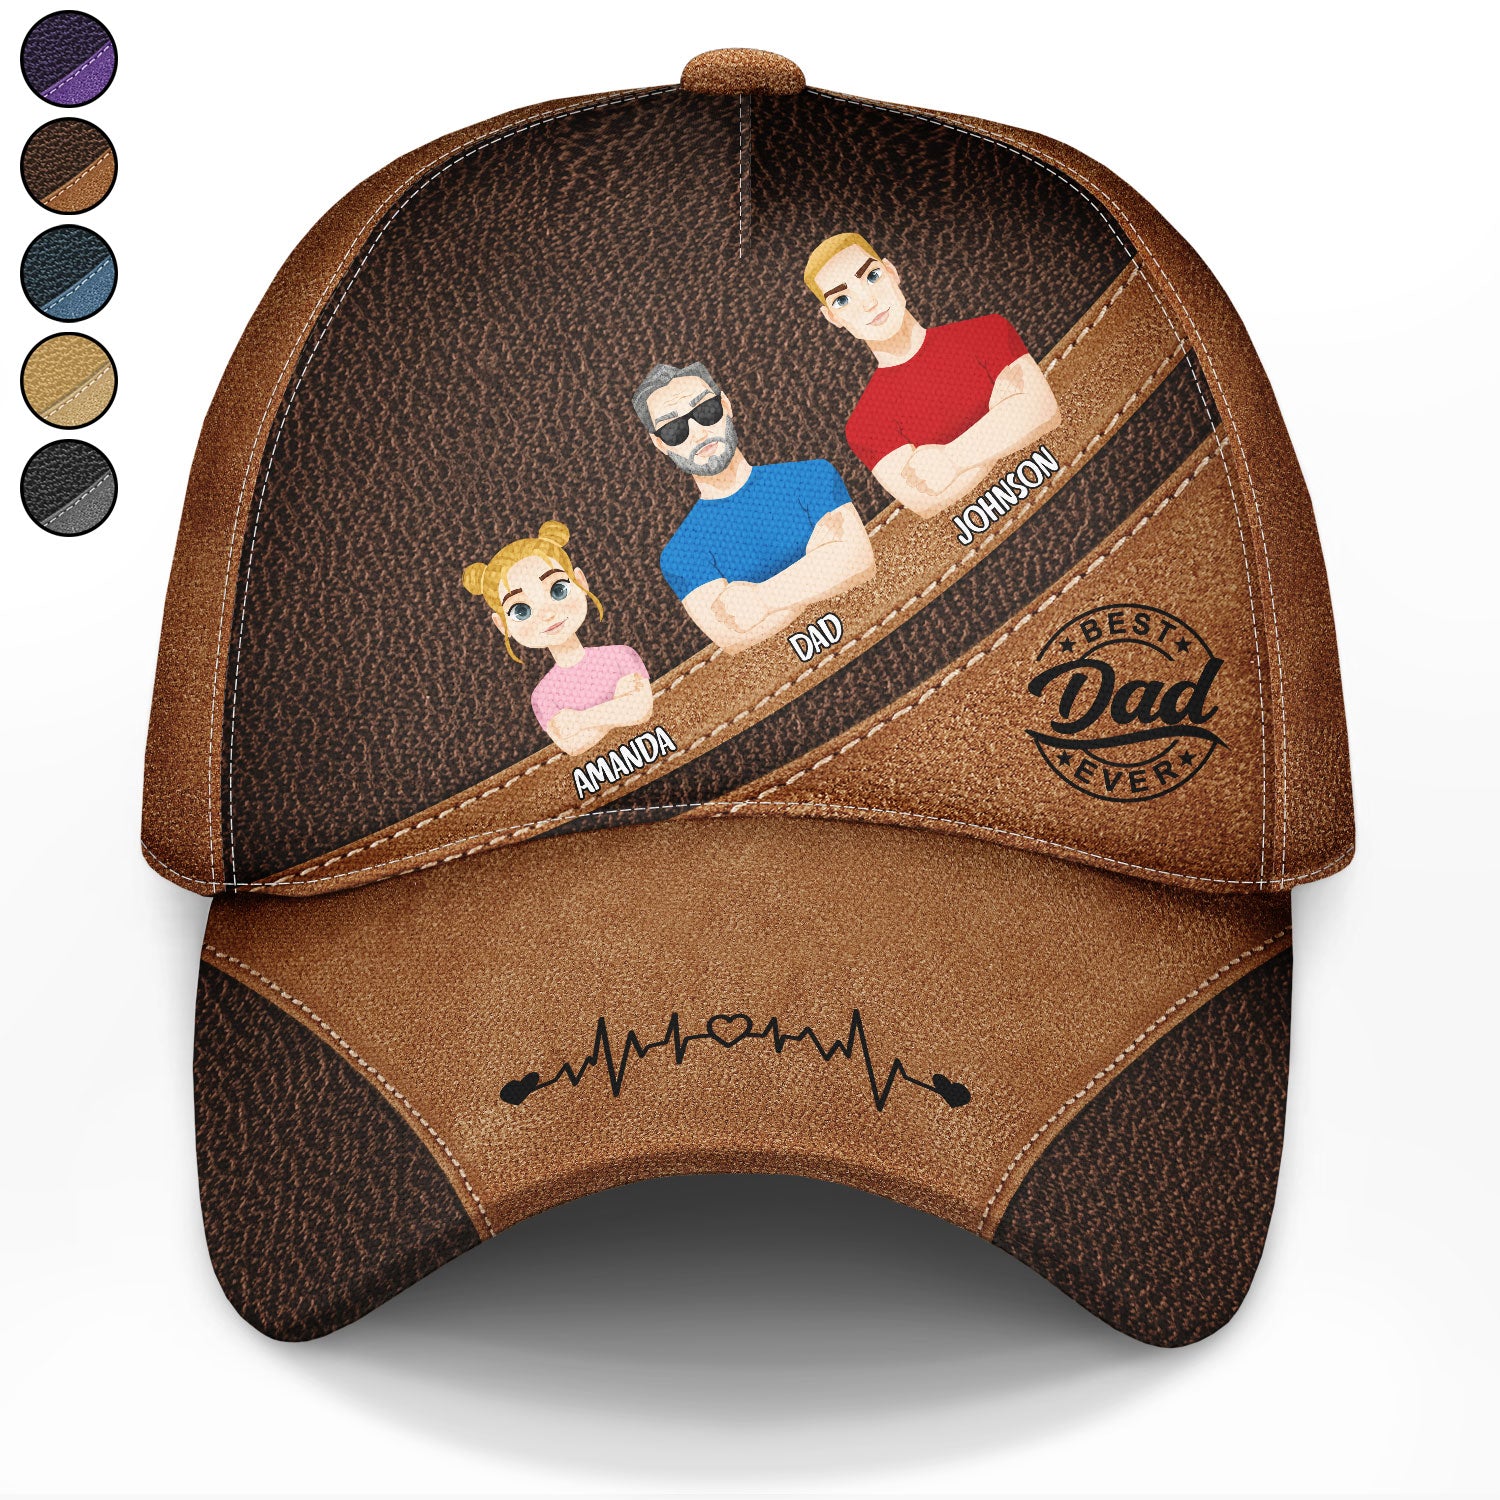 Best Dad Ever - Birthday, Loving Gift For Father, Grandfather, Grandpa - Personalized Classic Cap